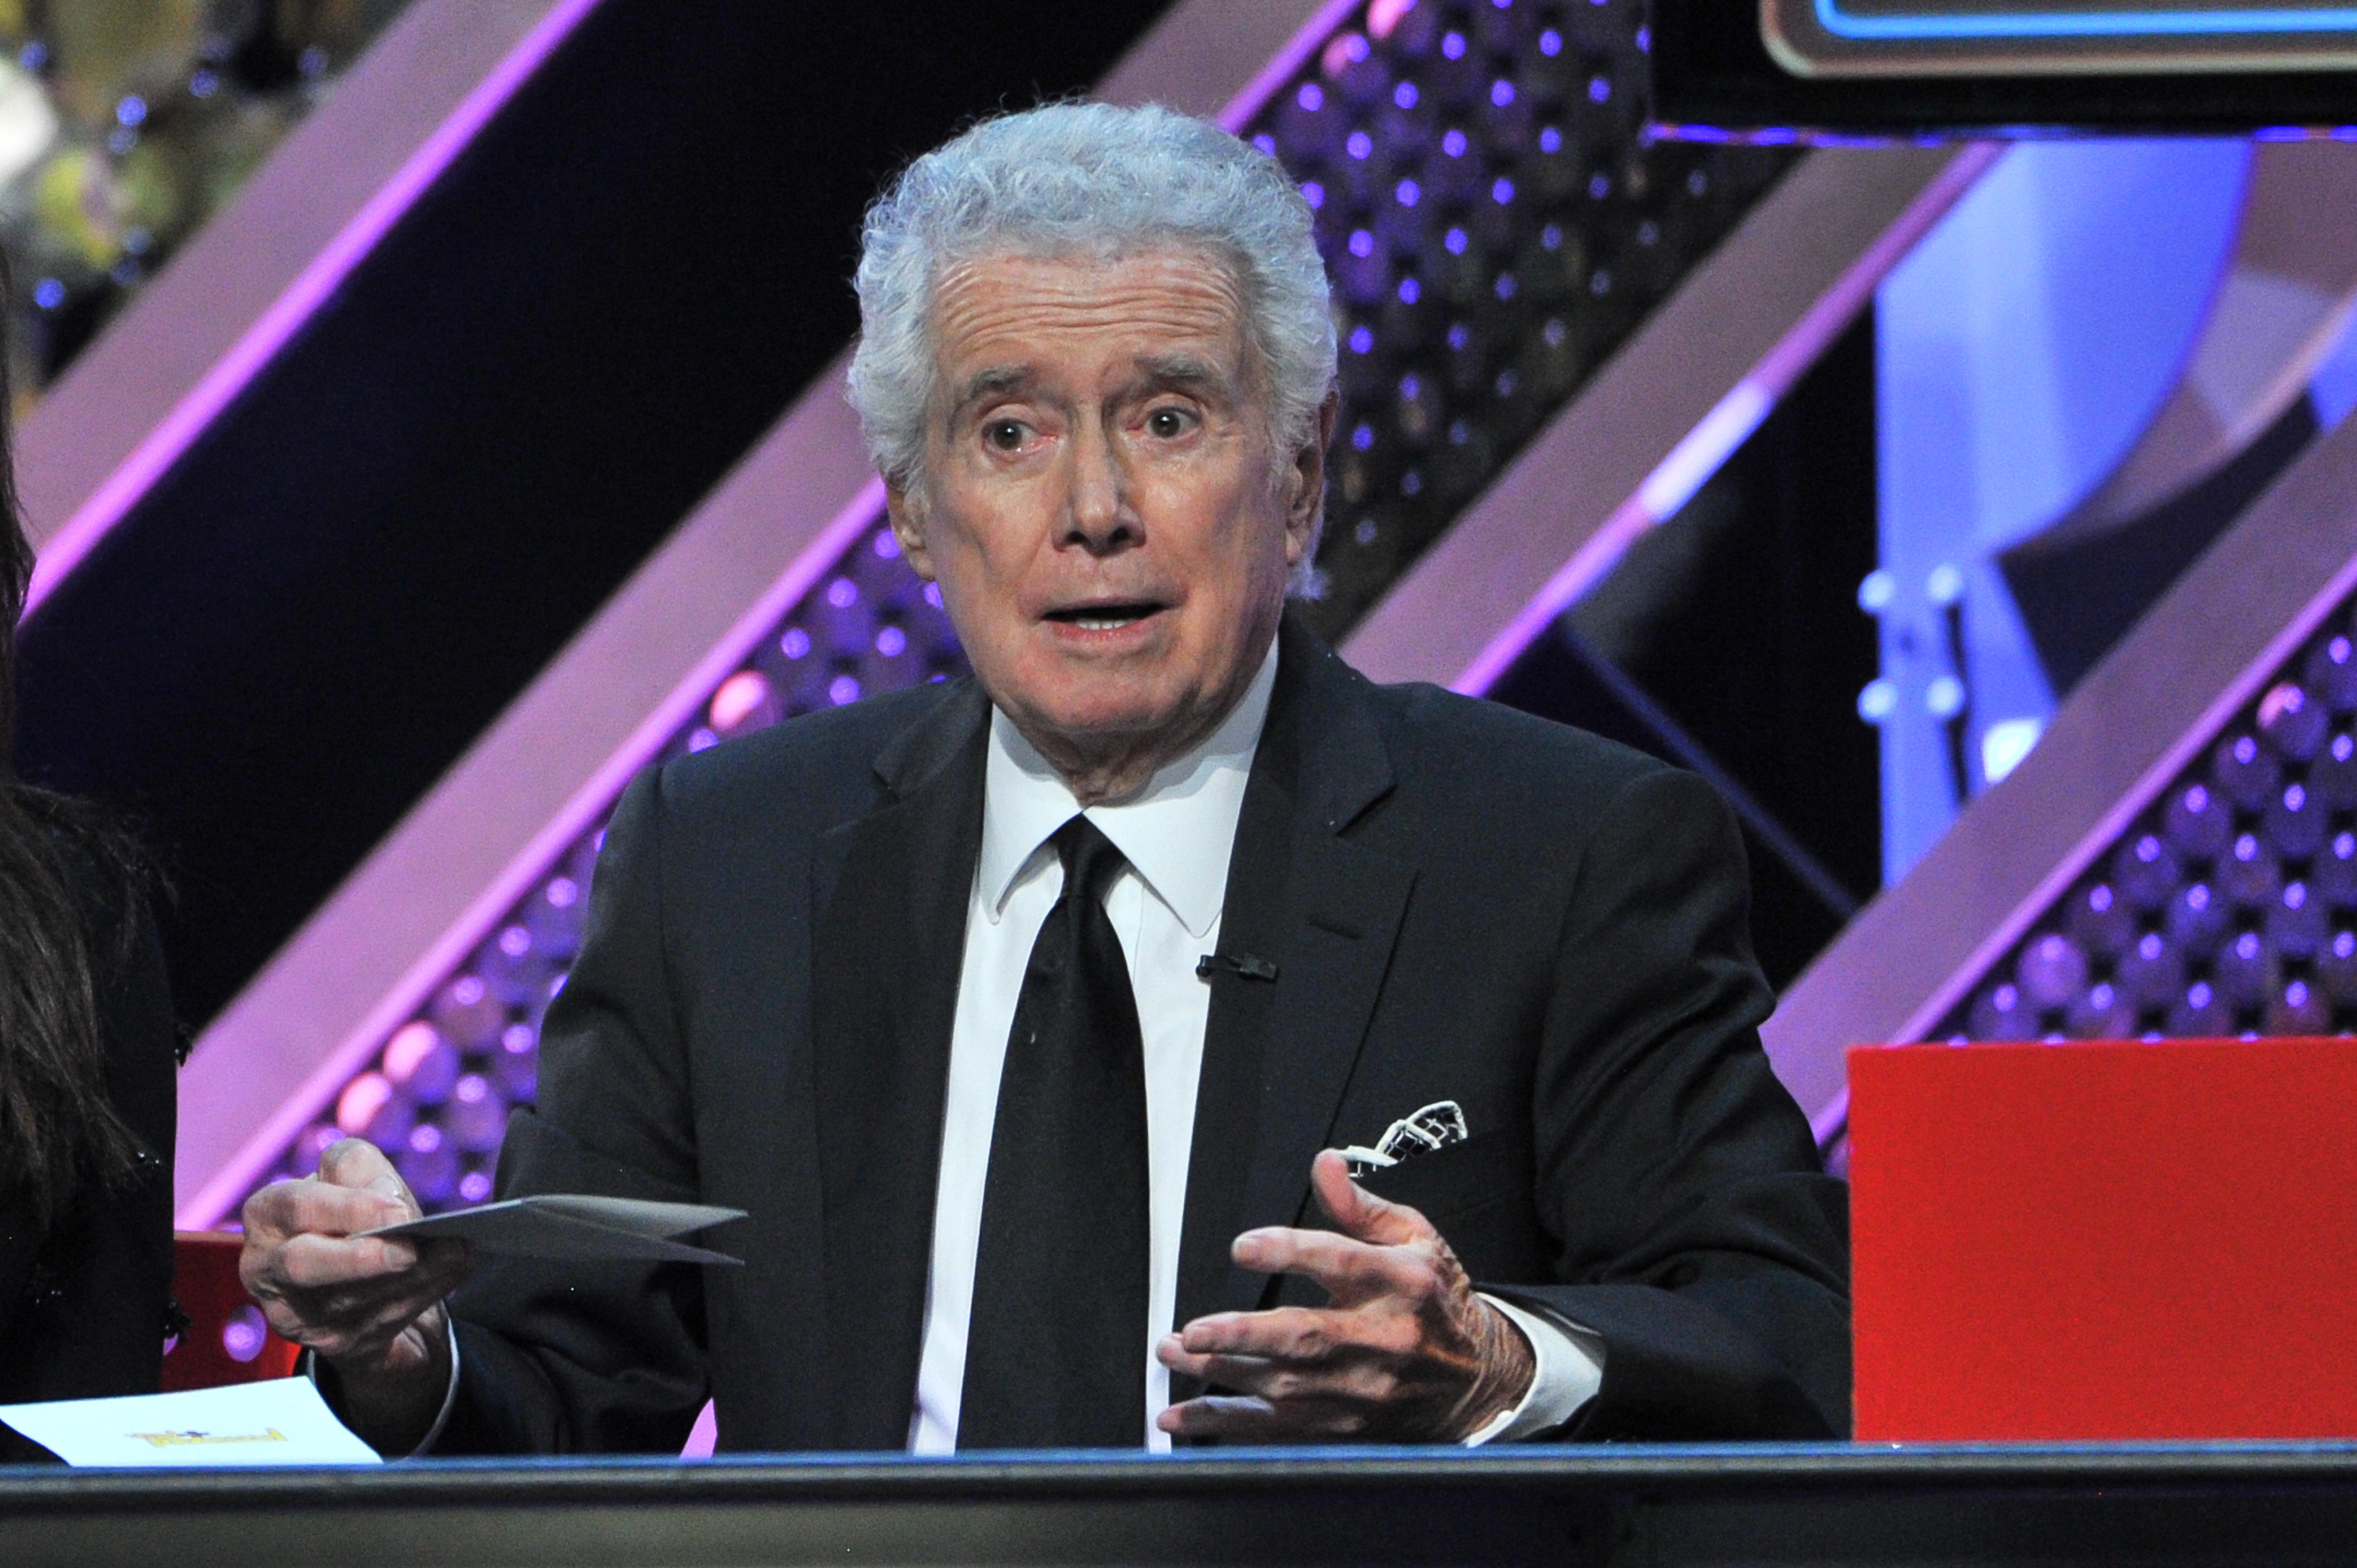 ‘Celebrity Jeopardy!’ Is        Re-airing Regis Philbin’s 1992 Guest Appearance – ‘In Memoriam and With Love’